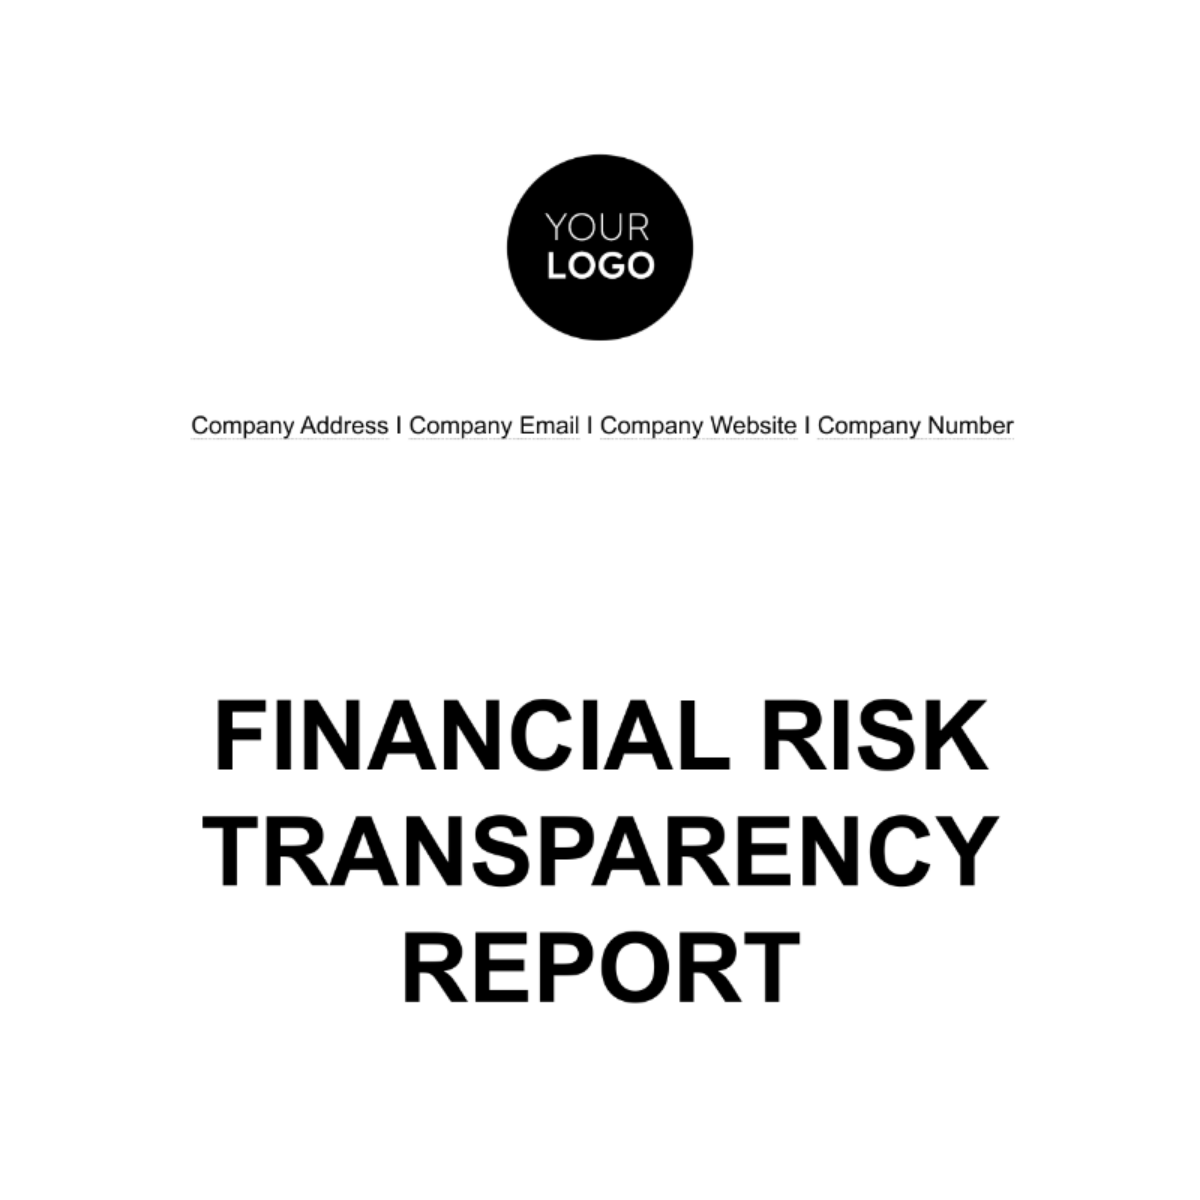 Financial Risk Transparency Report Template